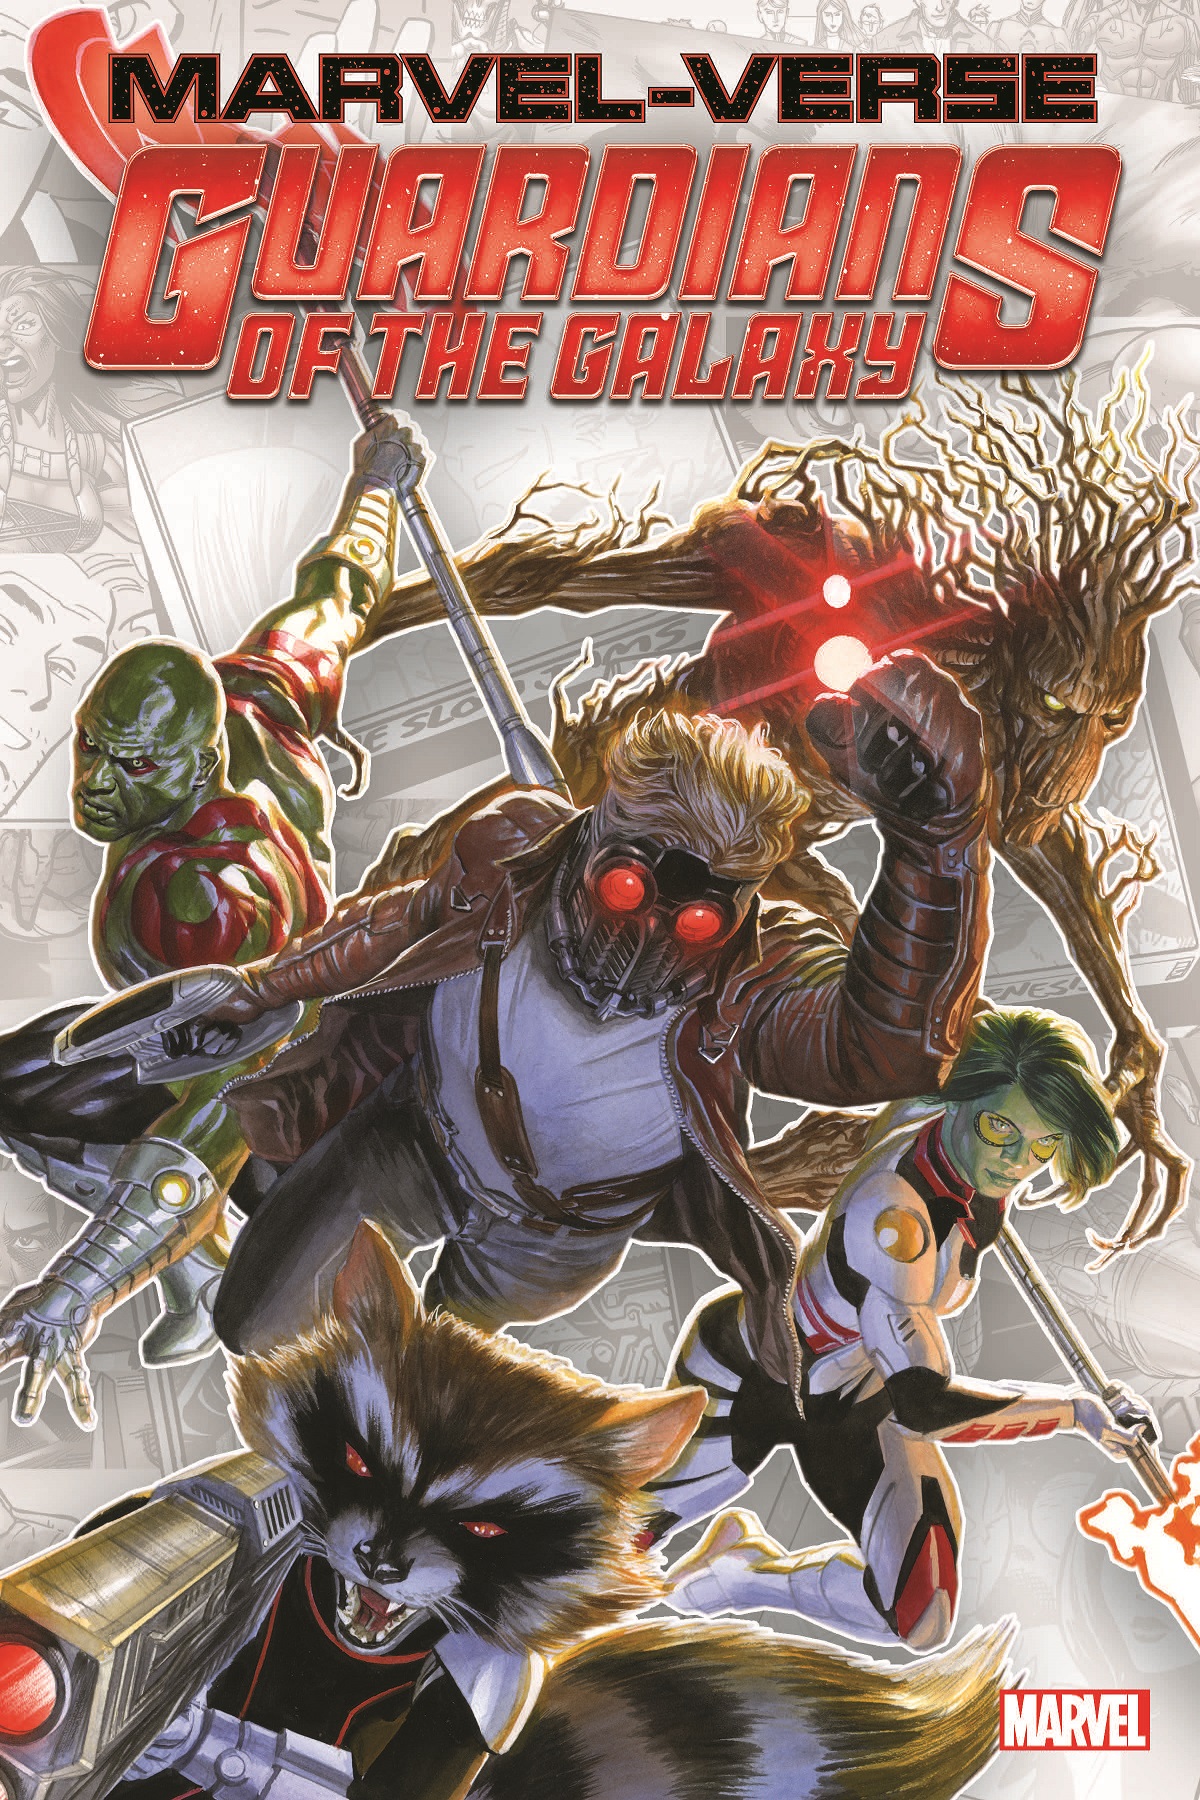 Marvel-Verse: Guardians Of The Galaxy (Trade Paperback)